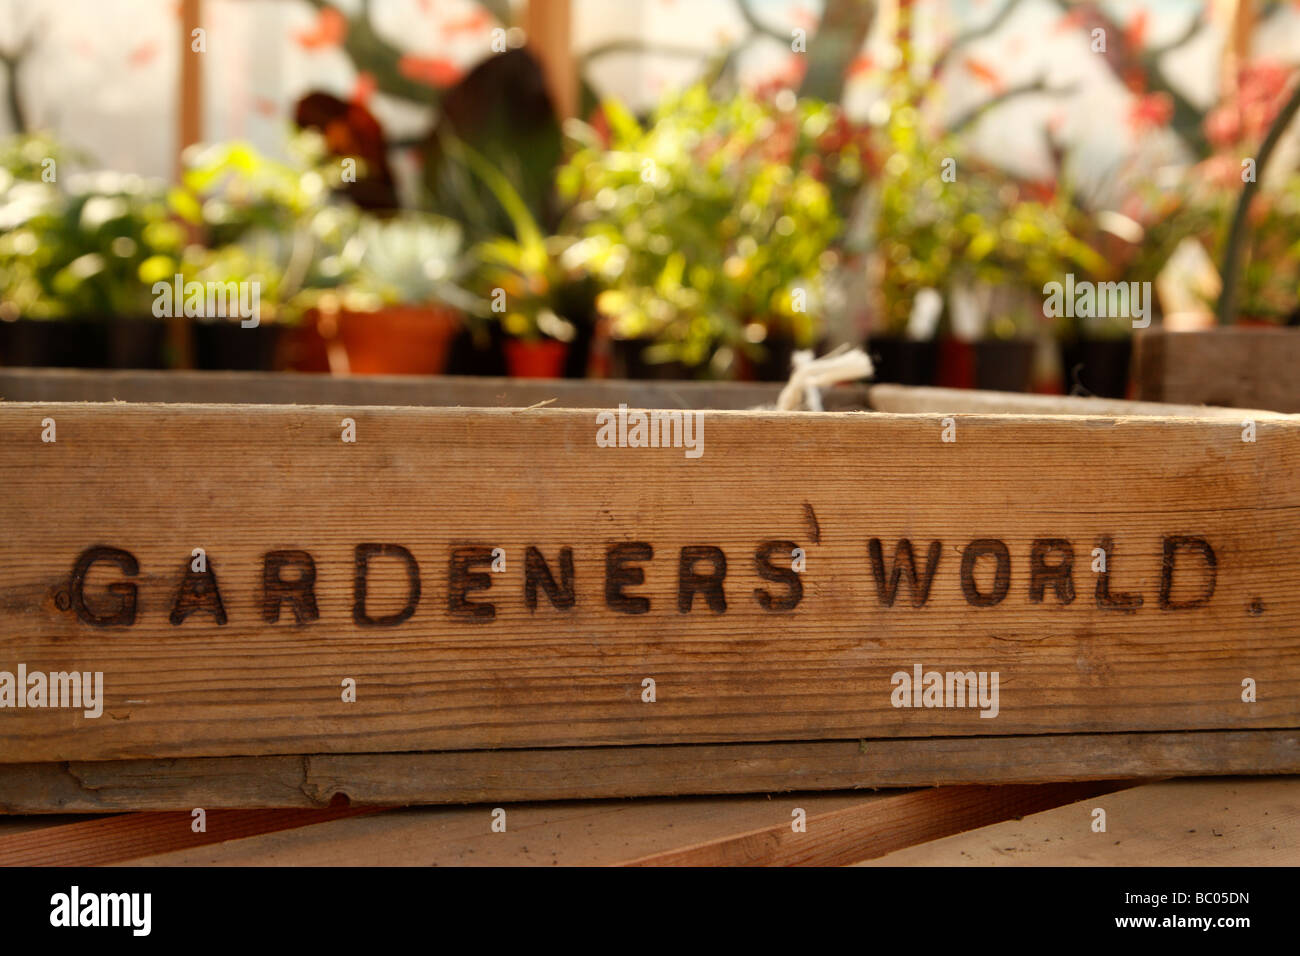 wooden seed tray with the words gardeners world stamped on Stock Photo